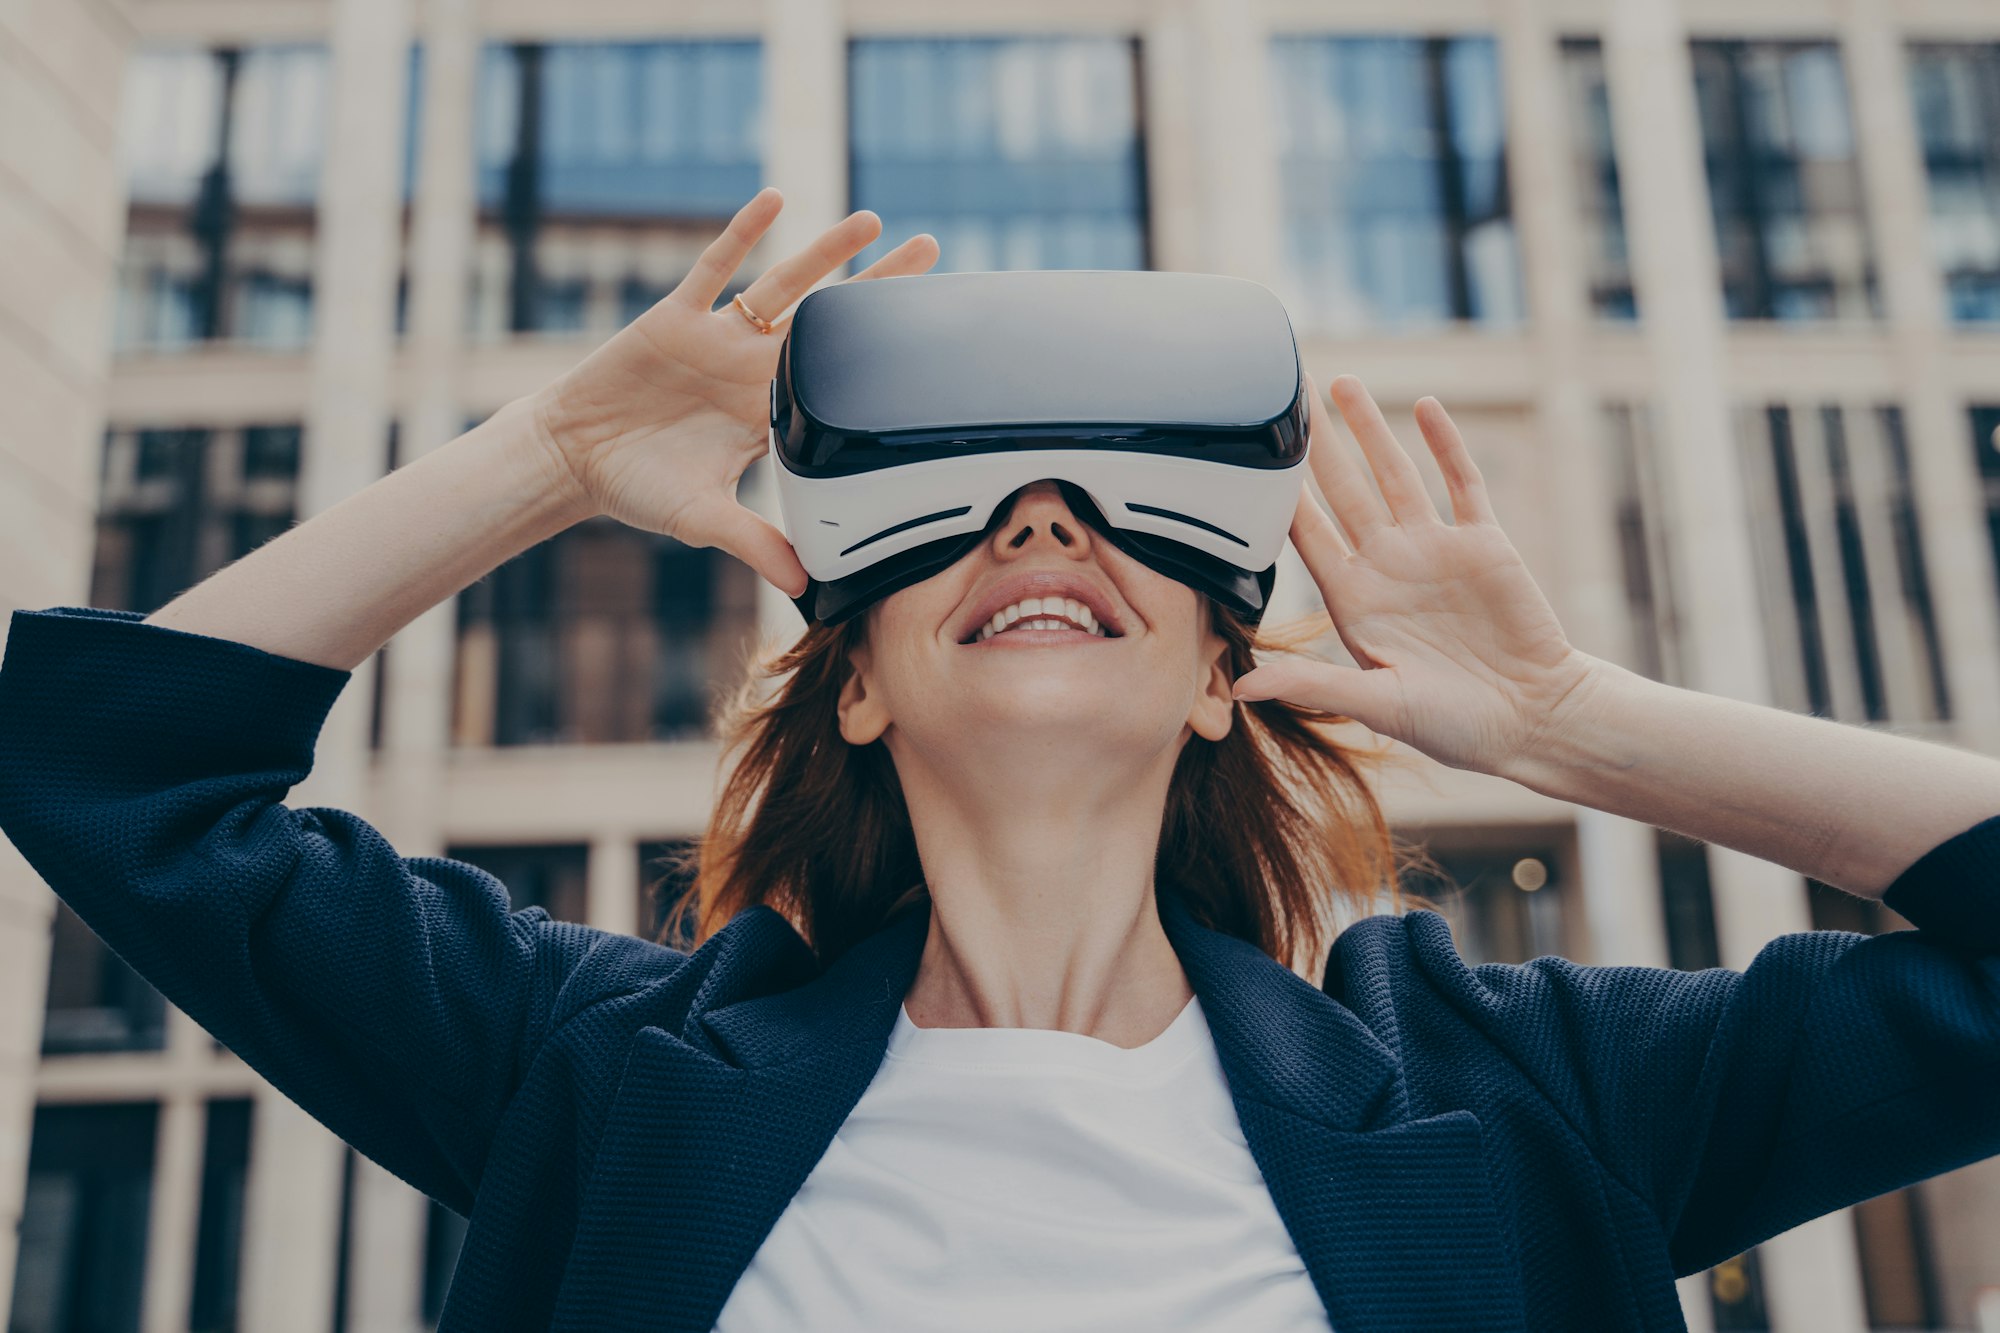 Immersed woman looking up in virtual reality while wearing portable VR, standing on city street